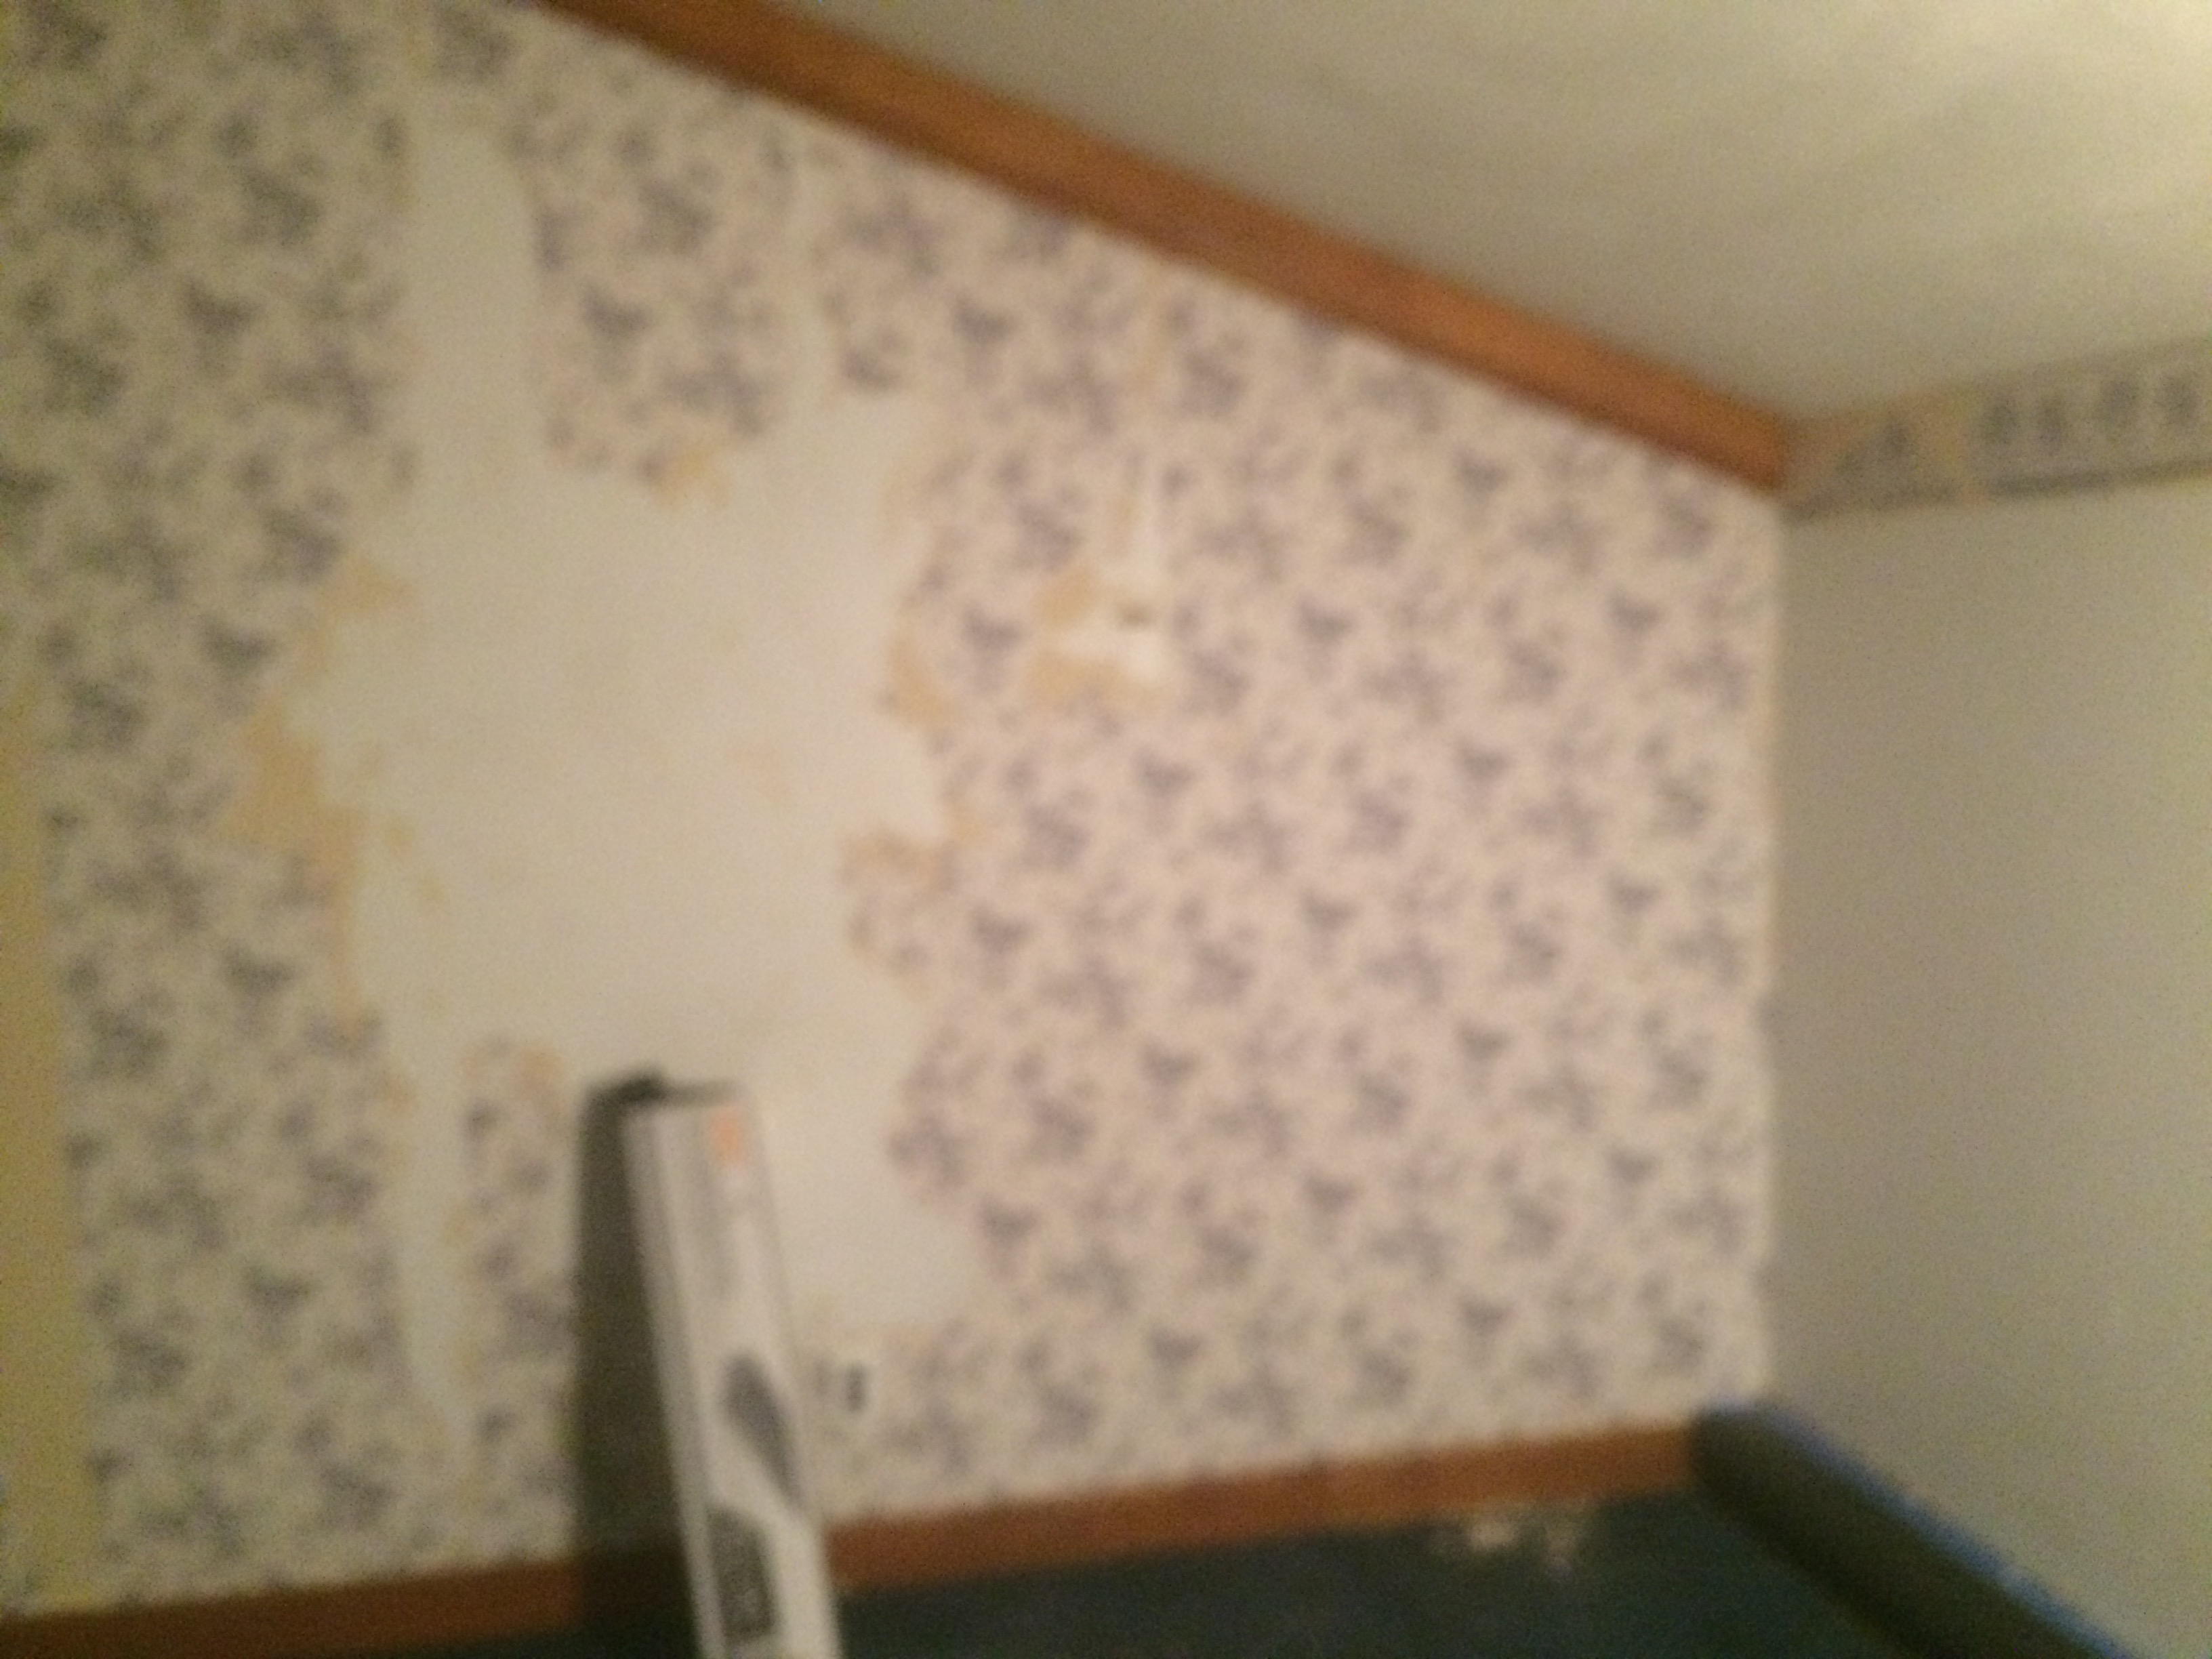 Wallpaper remaining on walls after we were told it was completely removed.